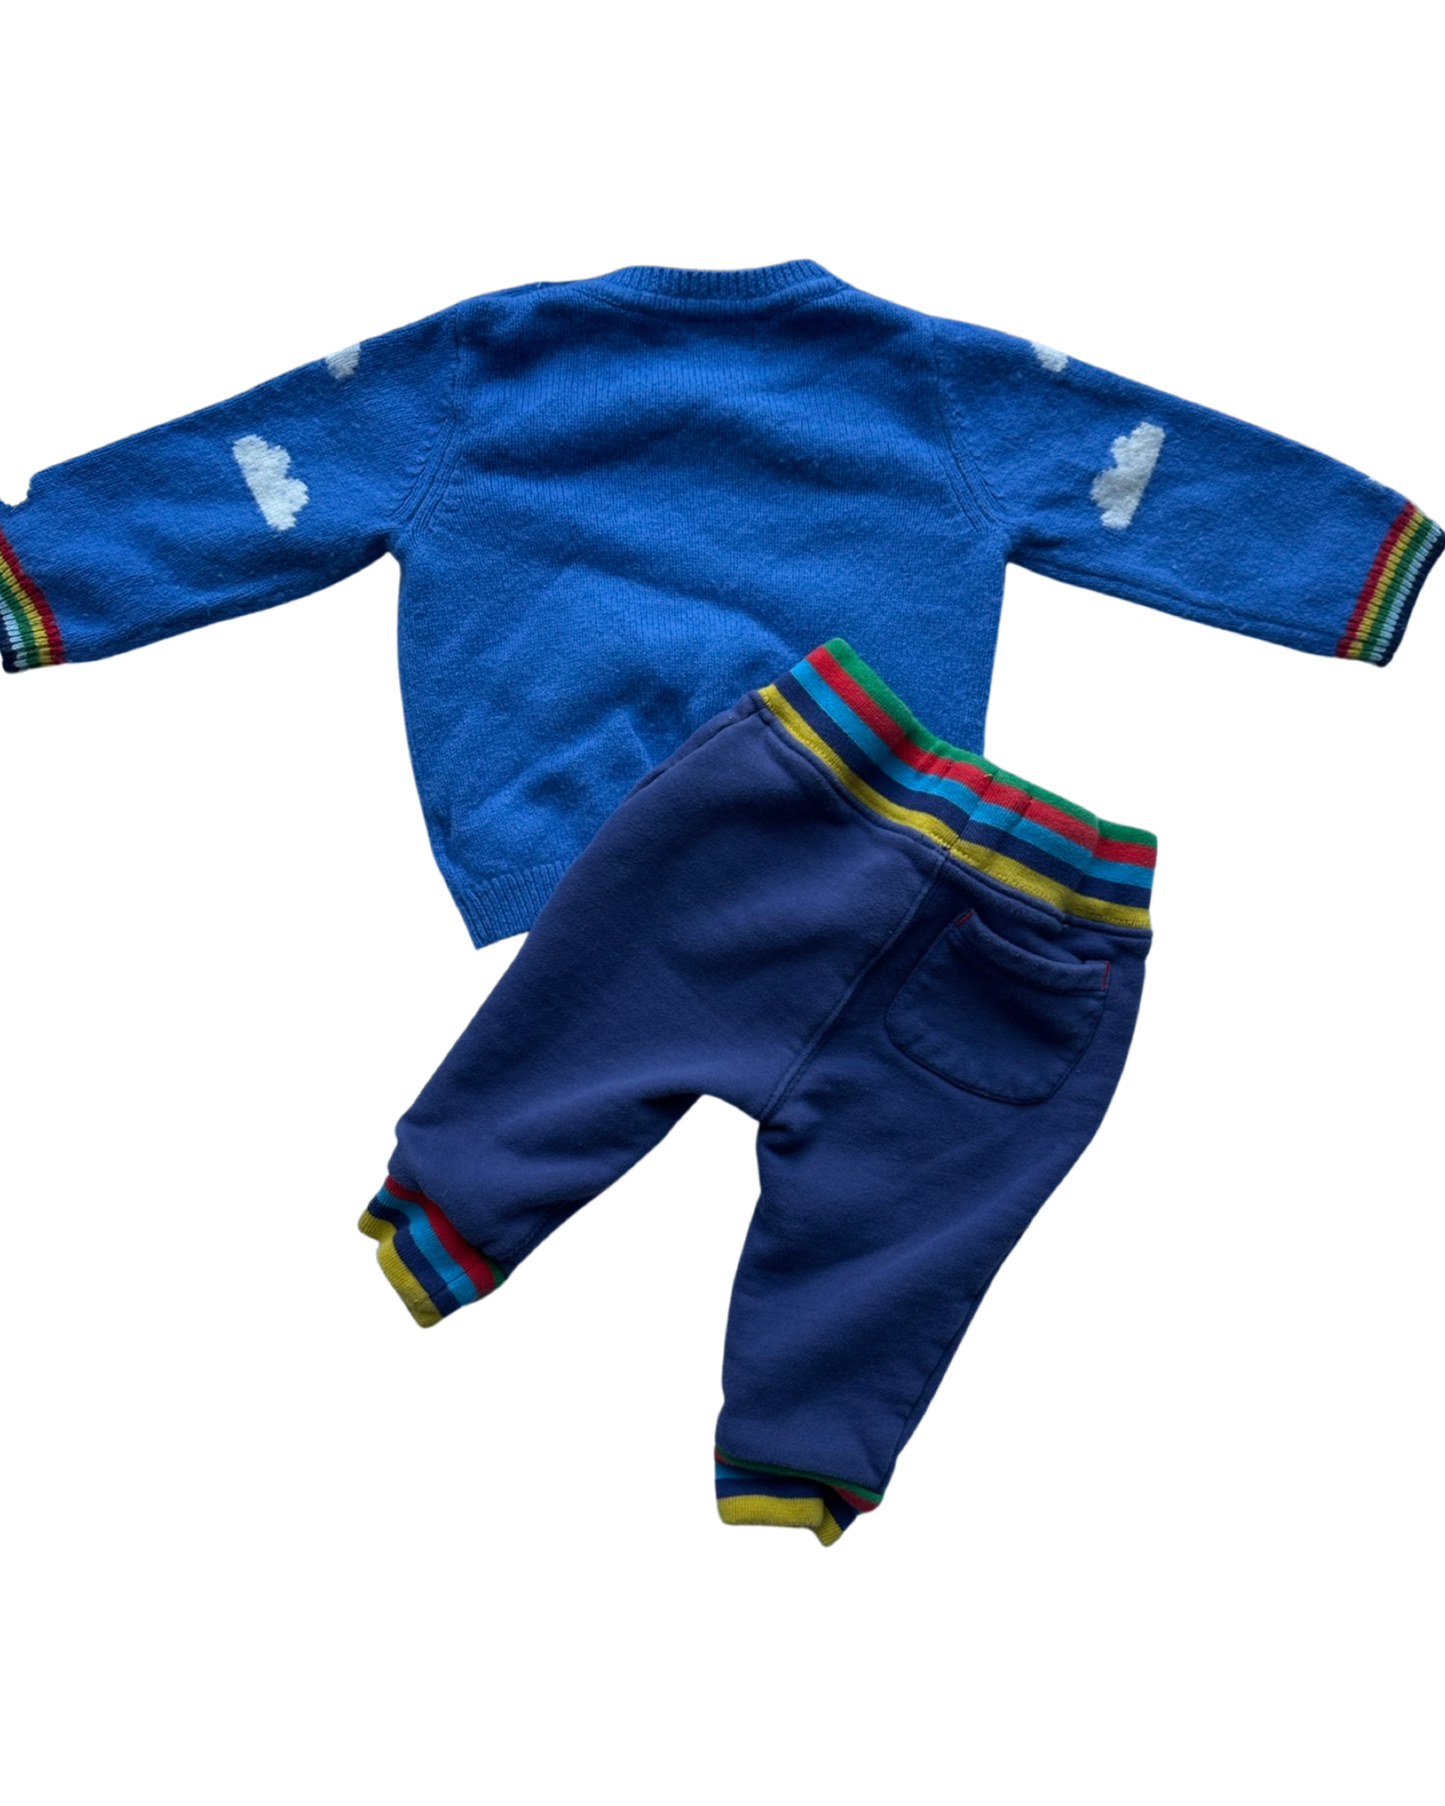 Baby Boden knitted jumper & joggers set (size 6-9mths)